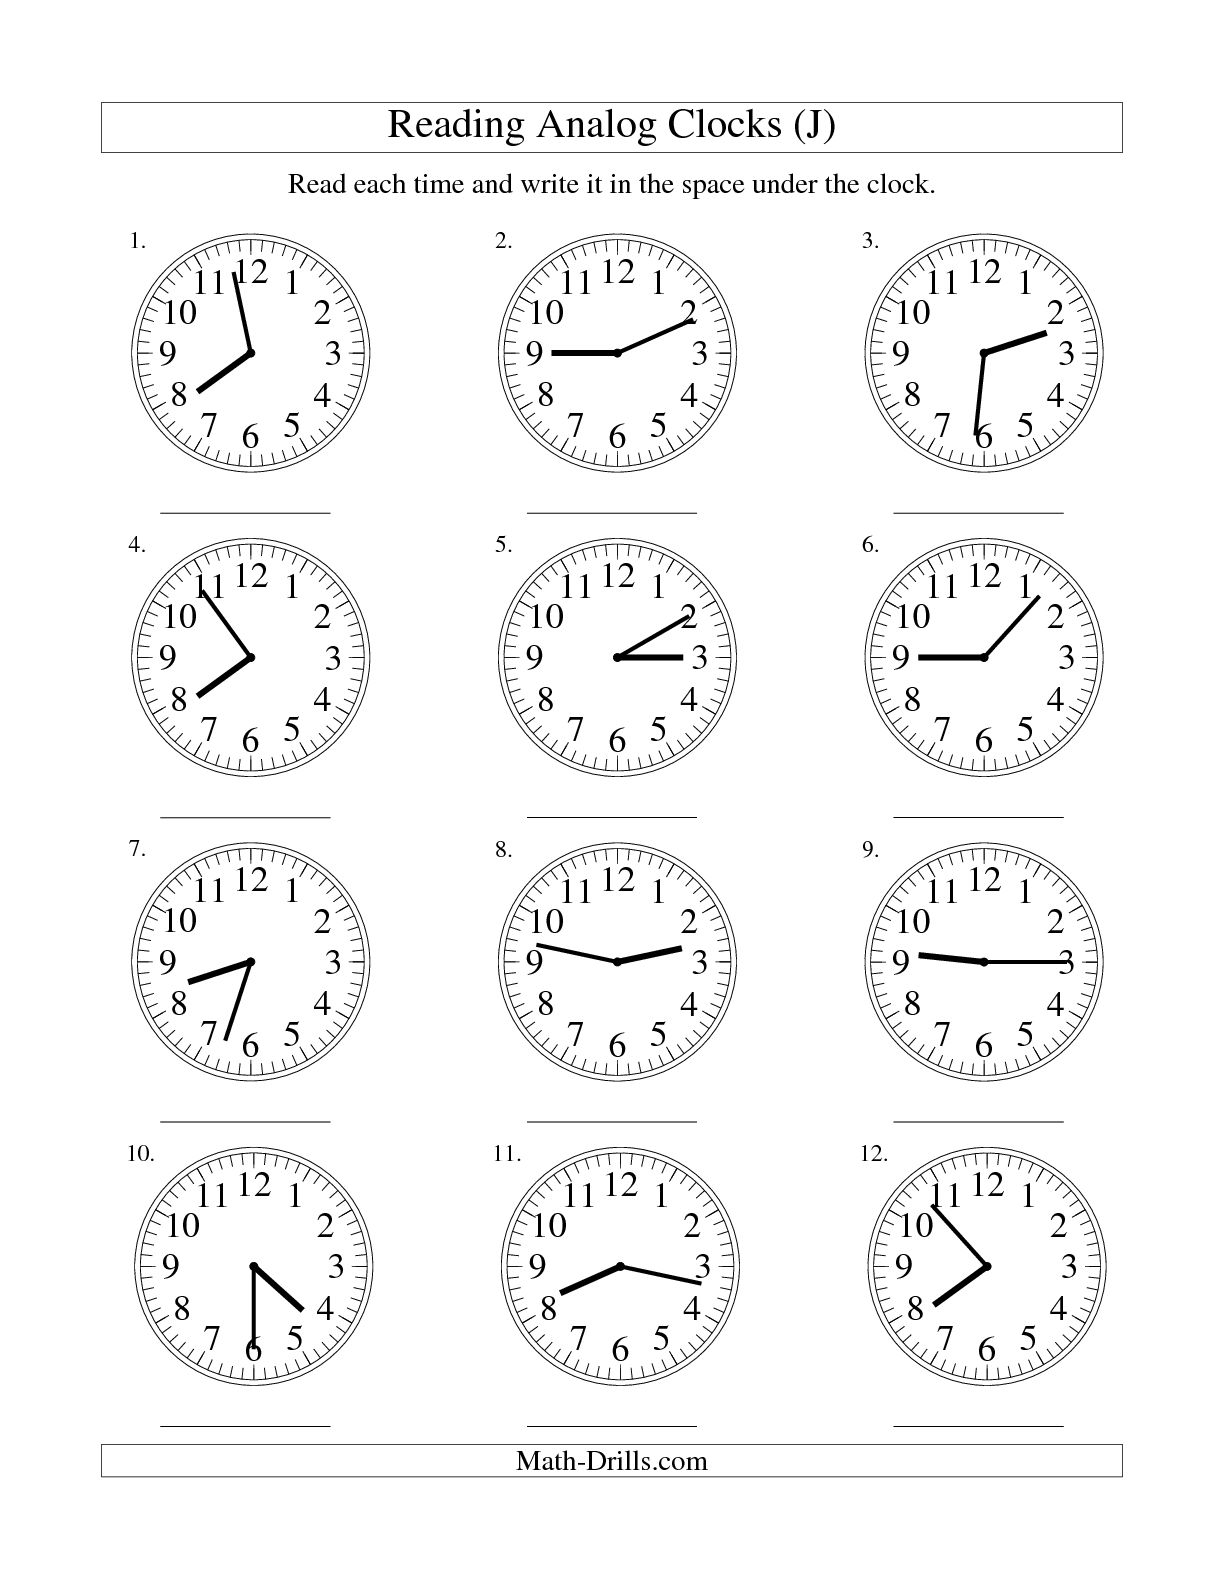 15-best-images-of-telling-time-worksheets-by-5-minutes-telling-time-worksheets-telling-time